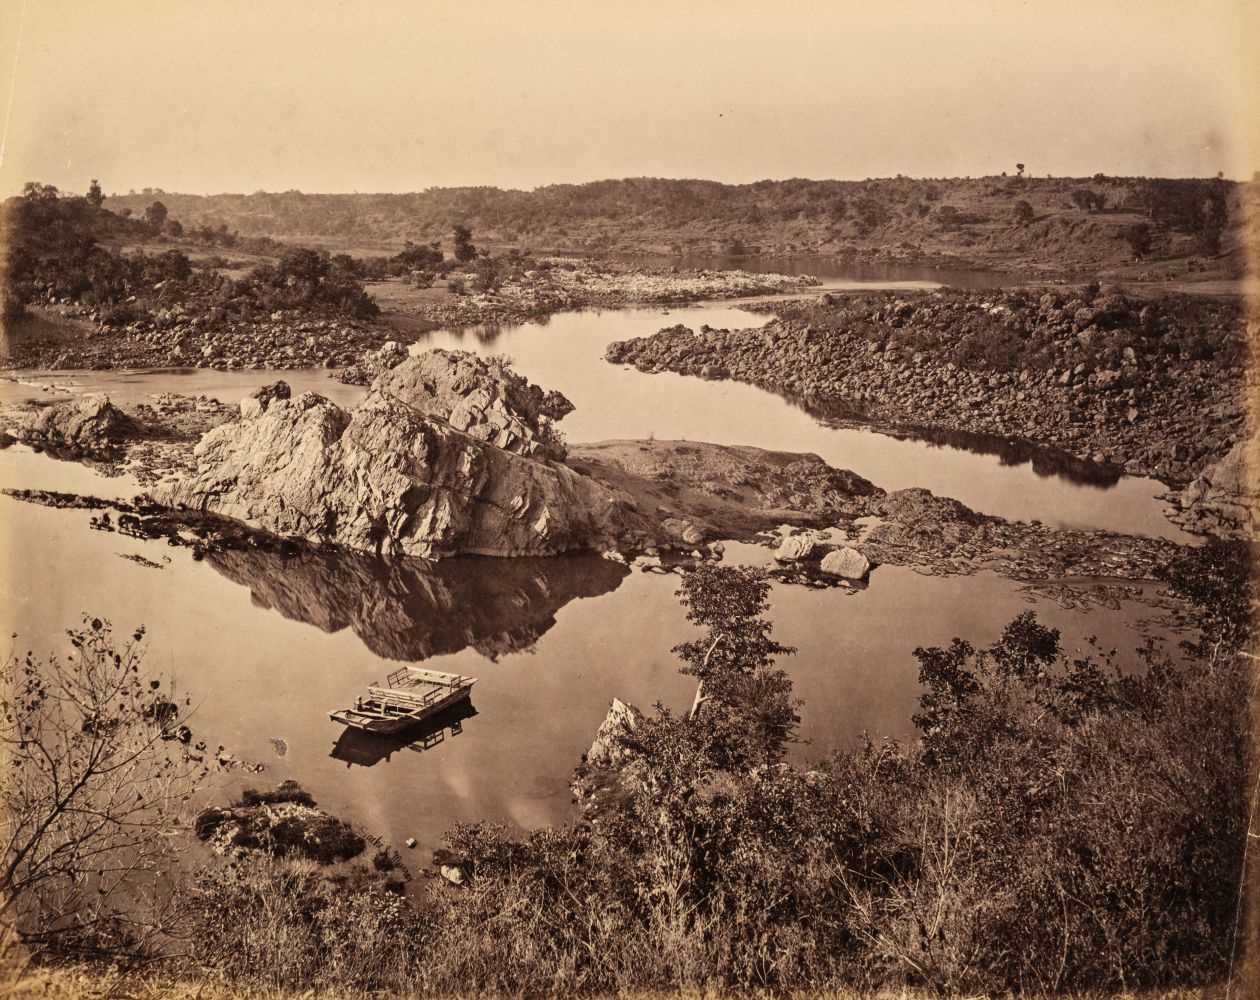 Lot 31 - India. A disbound album of 72 photographs, compiled by A. B. Sampson, c. 1860s